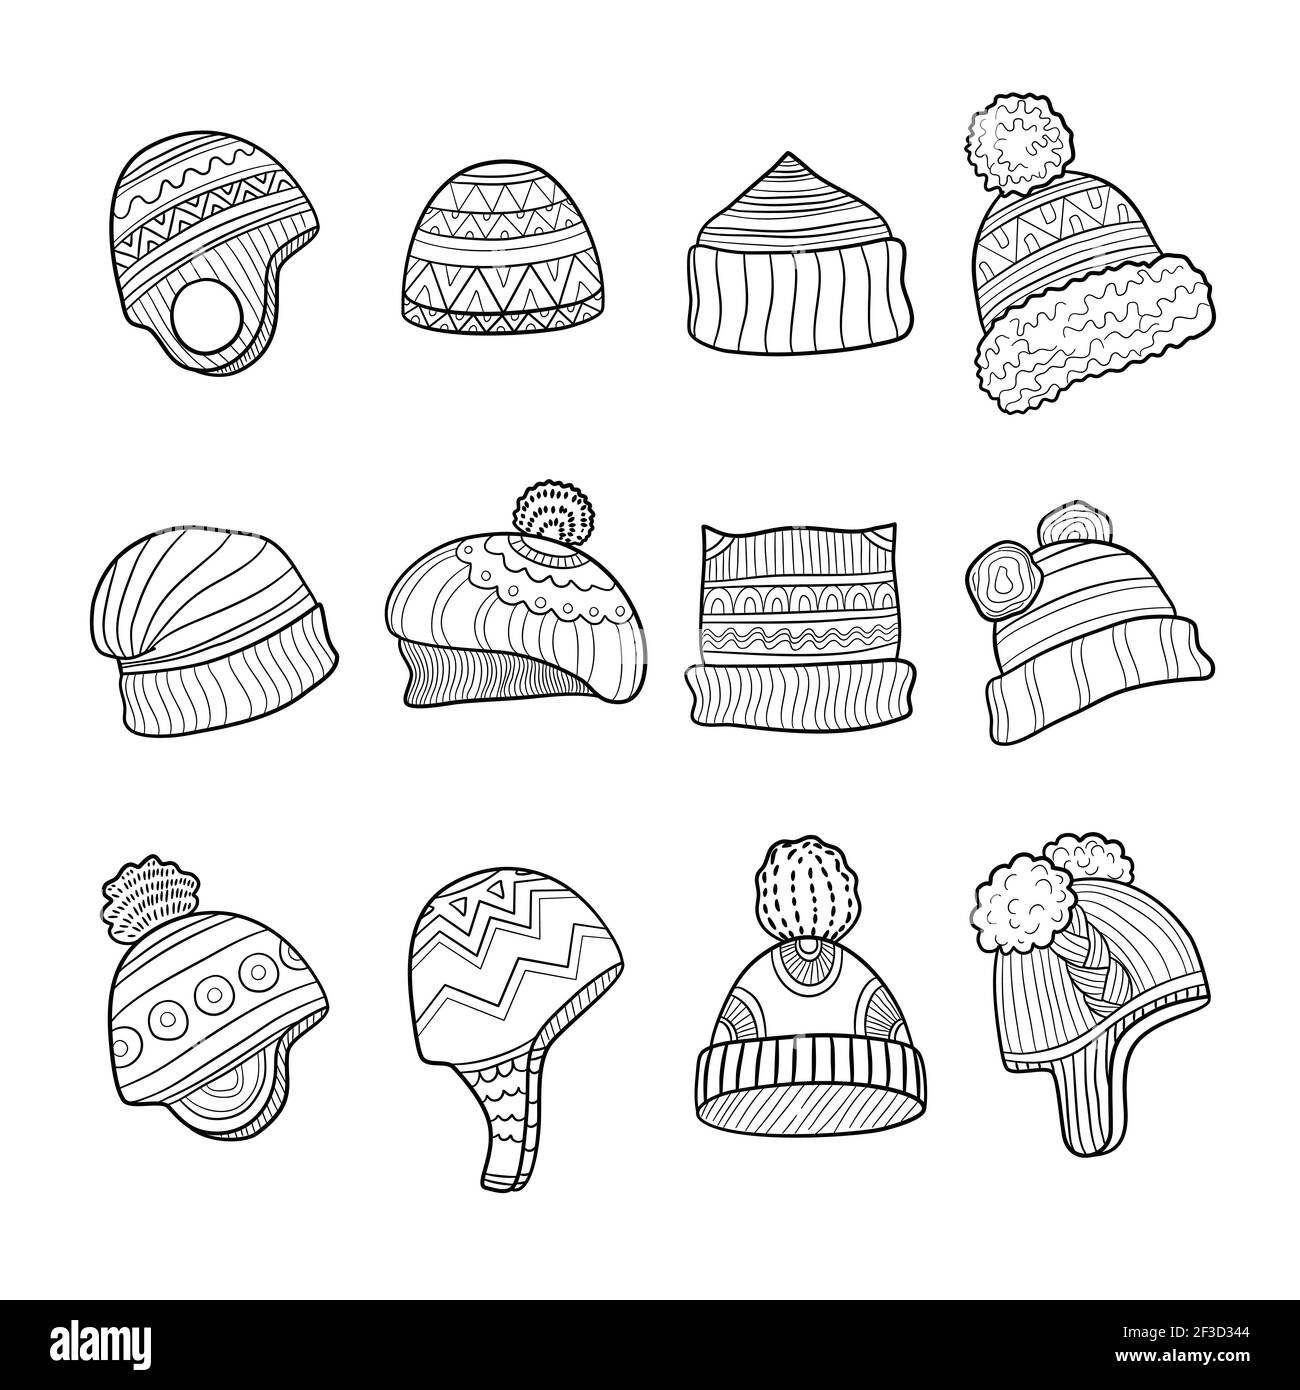 Winter Hat Cold Season Clothes Warm Ears Flapping Vector Doodle